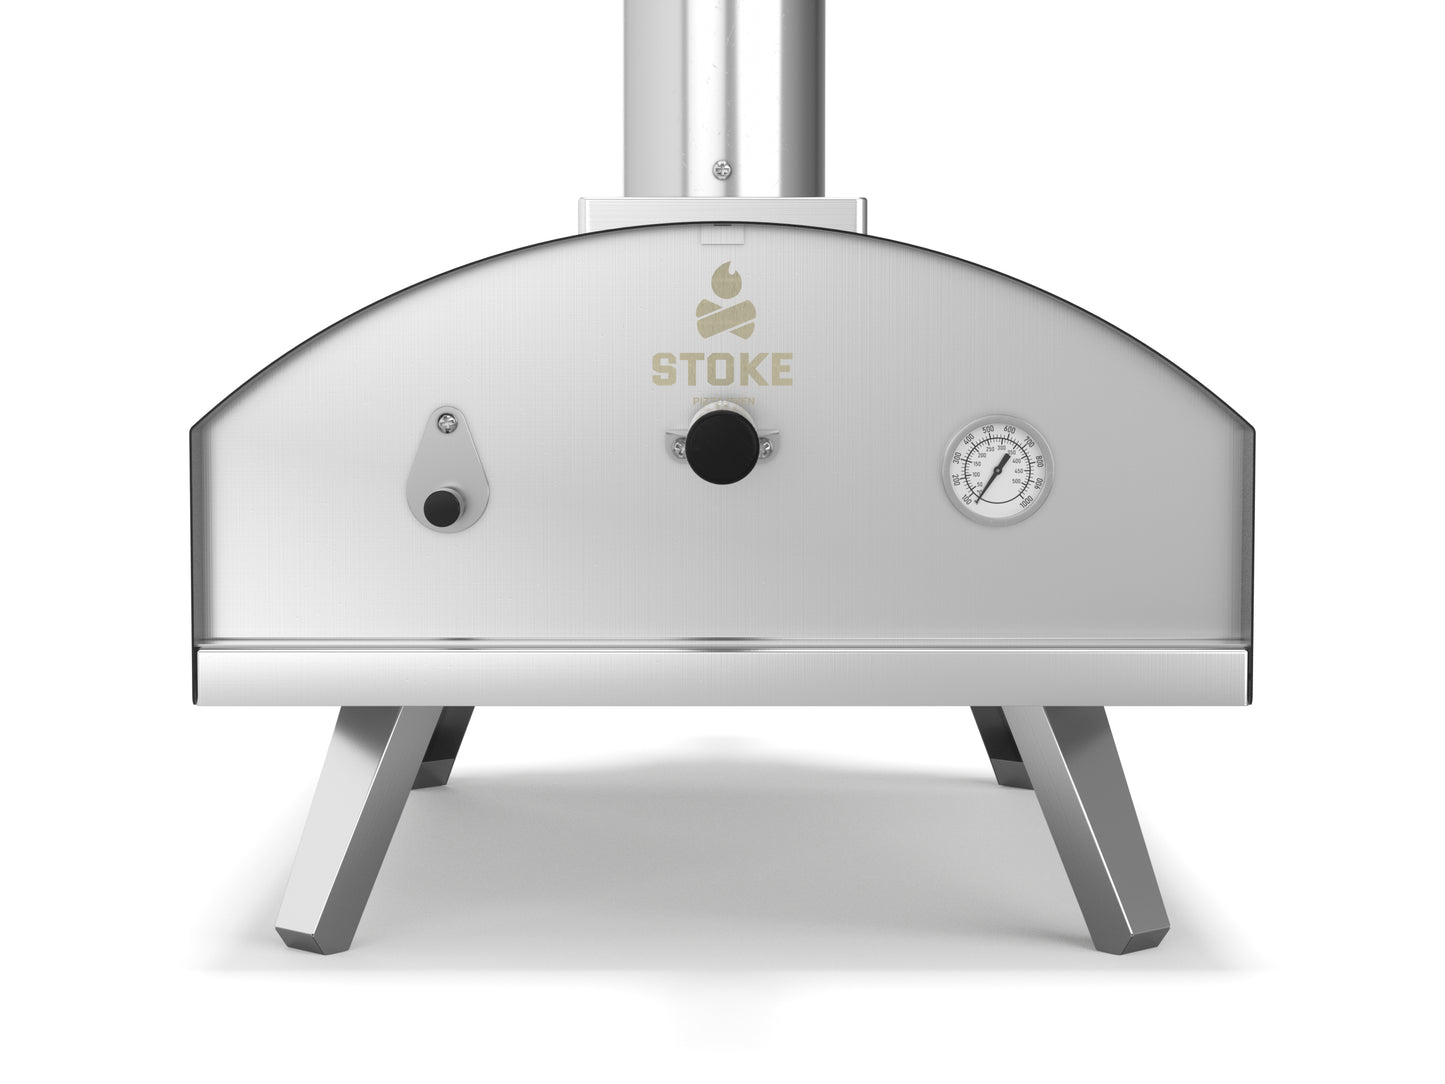 THE STOKE PIZZA OVEN